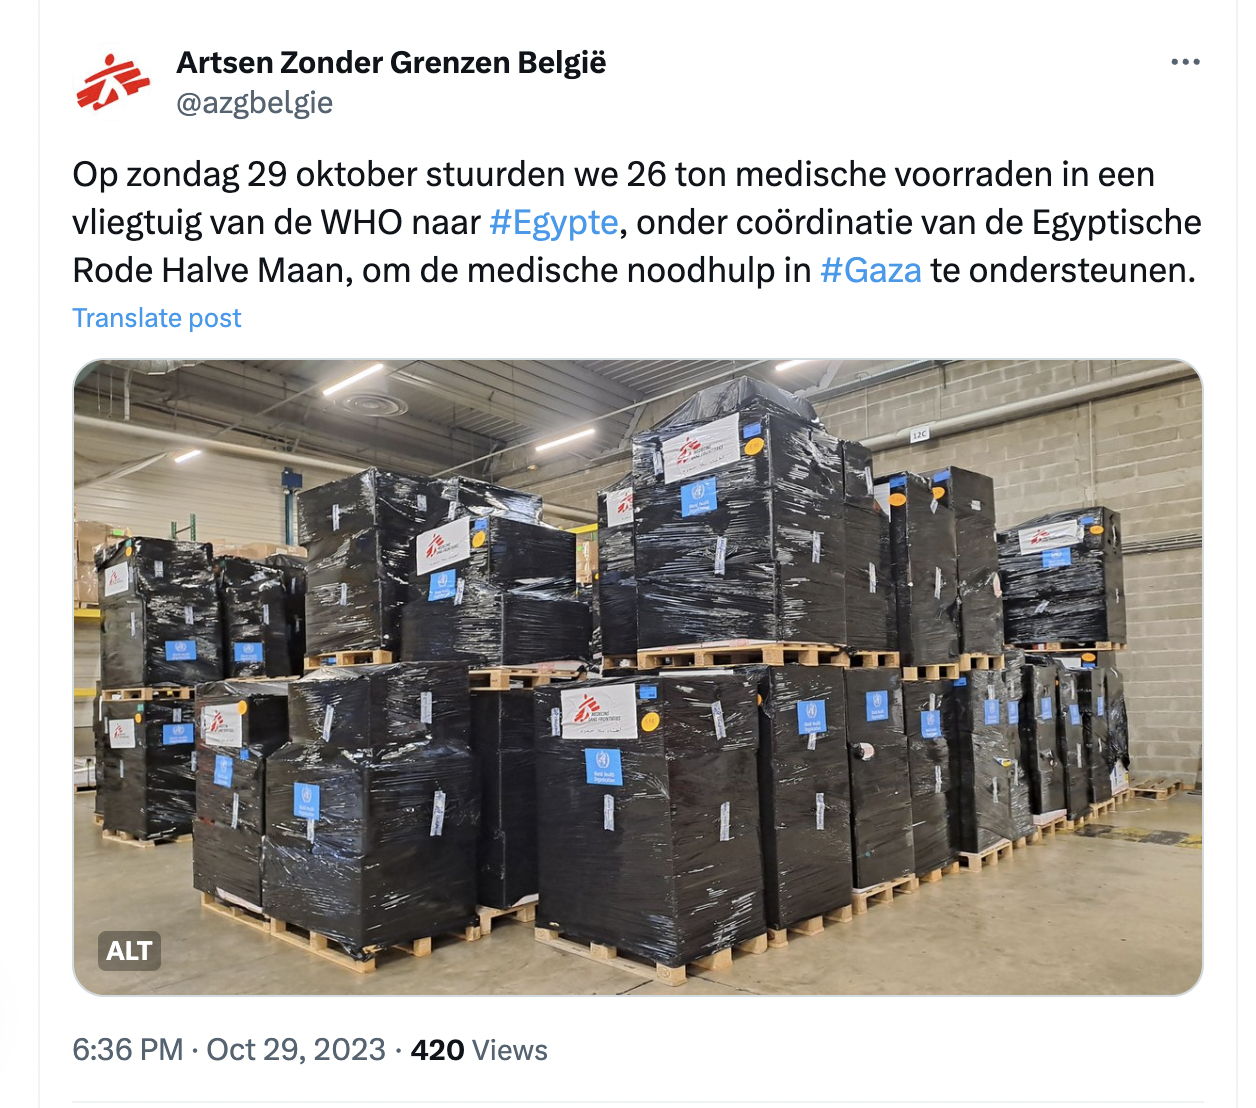 "On Sunday, October 29, we sent 26 tonnes of medical supplies on a WHO plane to #Egypt, coordinated by the Egyptian Red Crescent, to support the emergency medical response in #Gaza"